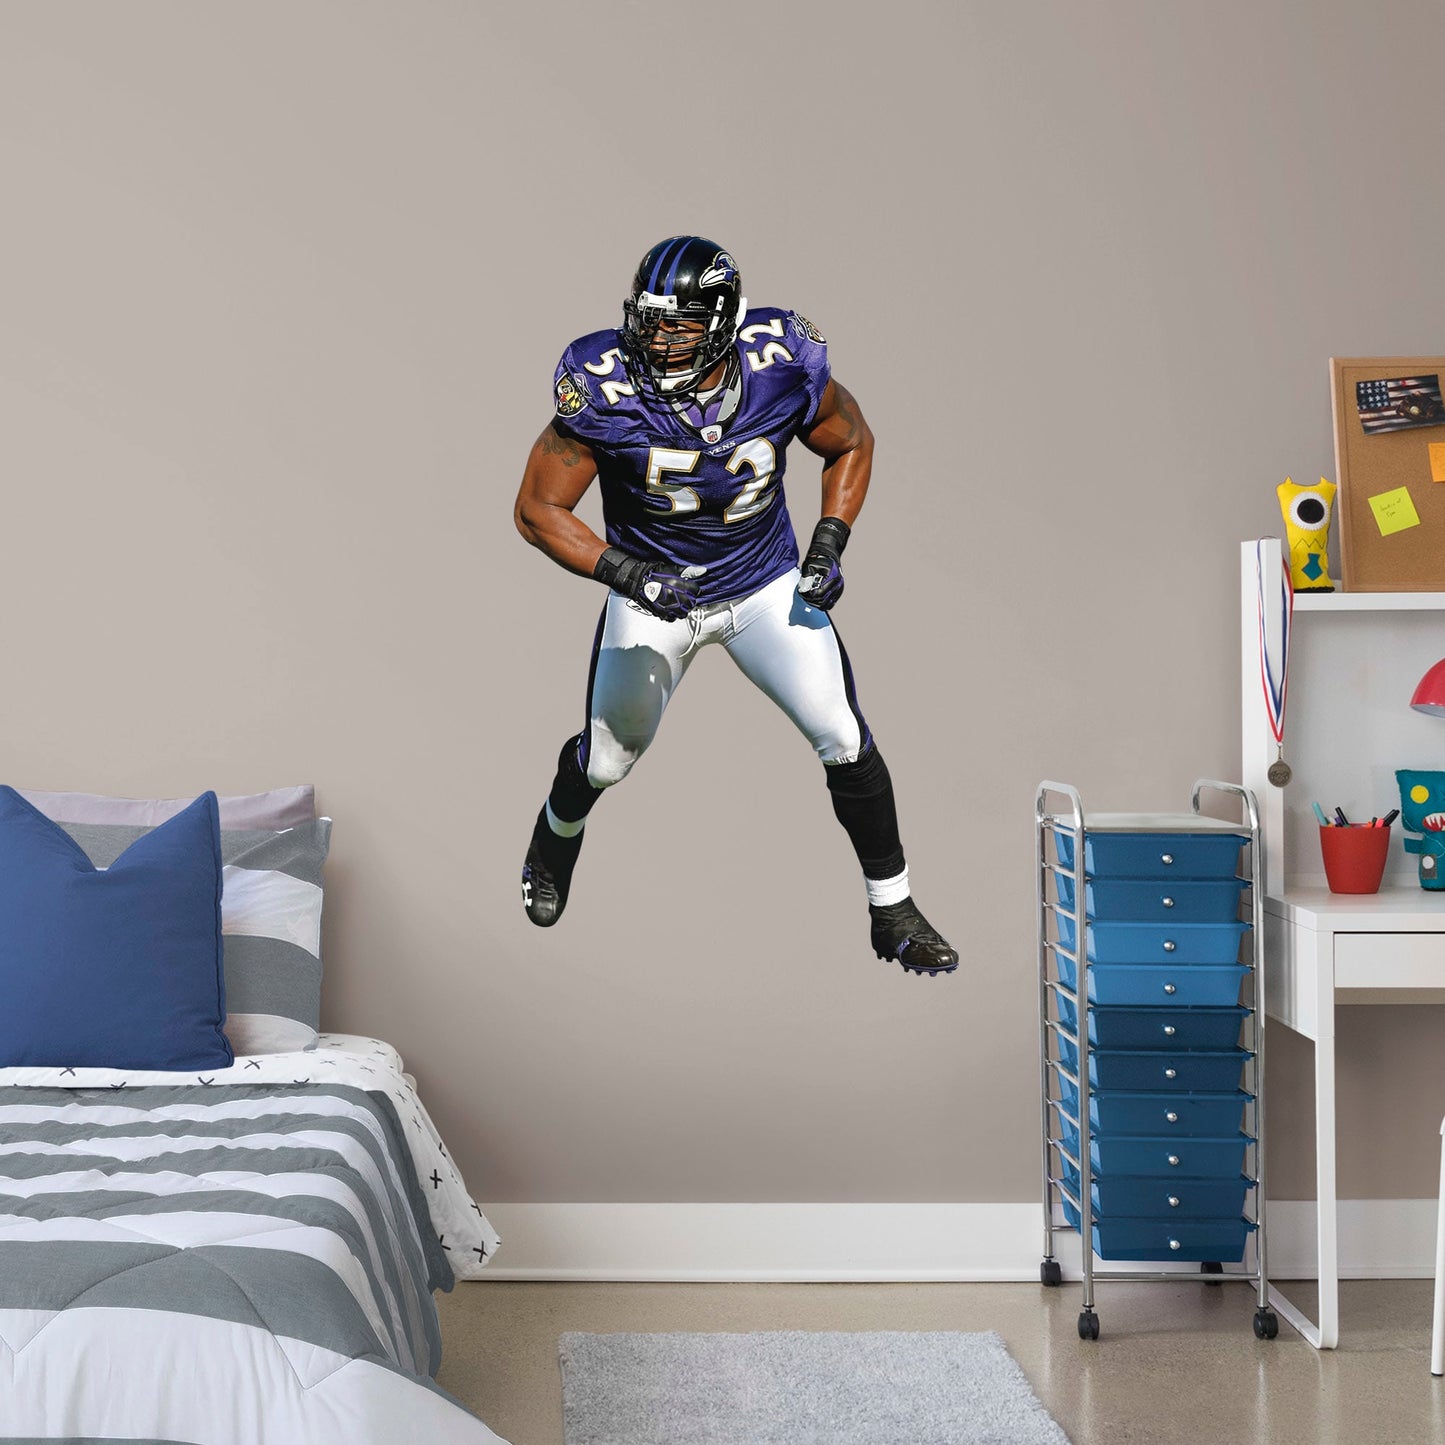 Giant Athlete + 2 Decals (31"W x 51"H) He's the second linebacker ever to win the NFL's Super Bowl MVP Award, and now, Brickwall, a.k.a. Ray Lewis, is ready for the bedroom, living room or locker room. This rugged, removable wall decal features the full figure of two-time Super Bowl champion No. 52 in his black, purple and metallic gold Baltimore Ravens best. Go Ravens!